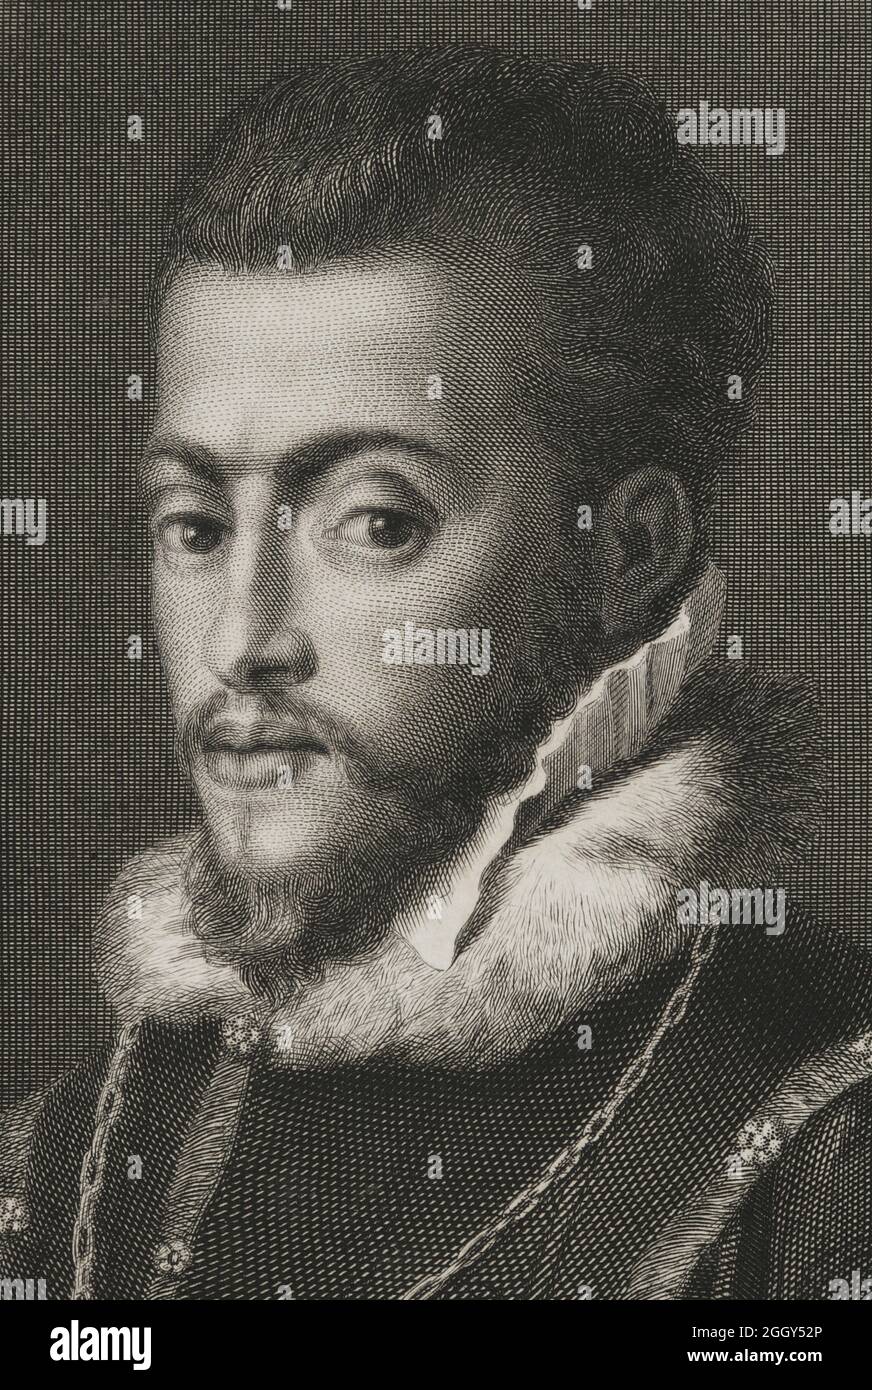 Philip II (1527-1598). King of Spain (1556-1598). Son of Emperor Charles V and Isabella of Portugal. Portrait. Engraving by Calamatta. Correspondance de Philippe II sur les affaires des Pays-Bas. Published in Brussels, 1848. Historical Military Library of Barcelona, Catalonia, Spain. Author: Luigi Calamatta (1801-1869). Italian artist. Stock Photo